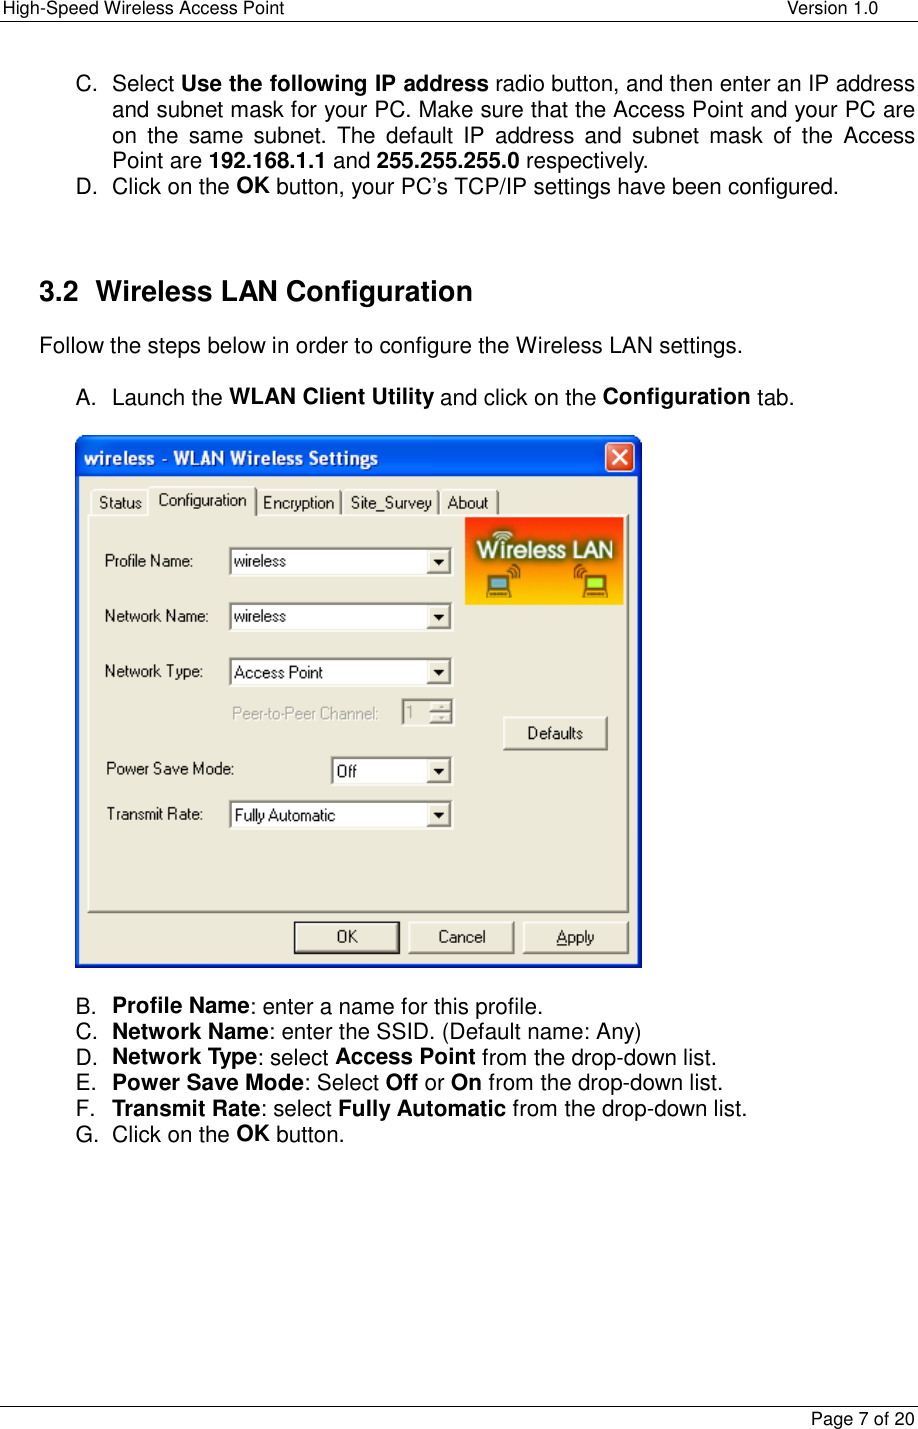 High-Speed Wireless Access Point    Version 1.0  Page 7 of 20  C. Select Use the following IP address radio button, and then enter an IP address and subnet mask for your PC. Make sure that the Access Point and your PC are on the same subnet. The default IP address and subnet mask of the Access Point are 192.168.1.1 and 255.255.255.0 respectively.   D. Click on the OK button, your PC’s TCP/IP settings have been configured.    3.2  Wireless LAN Configuration Follow the steps below in order to configure the Wireless LAN settings.  A. Launch the WLAN Client Utility and click on the Configuration tab.    B.  Profile Name: enter a name for this profile. C.  Network Name: enter the SSID. (Default name: Any) D.  Network Type: select Access Point from the drop-down list. E.  Power Save Mode: Select Off or On from the drop-down list.  F.  Transmit Rate: select Fully Automatic from the drop-down list. G. Click on the OK button.    